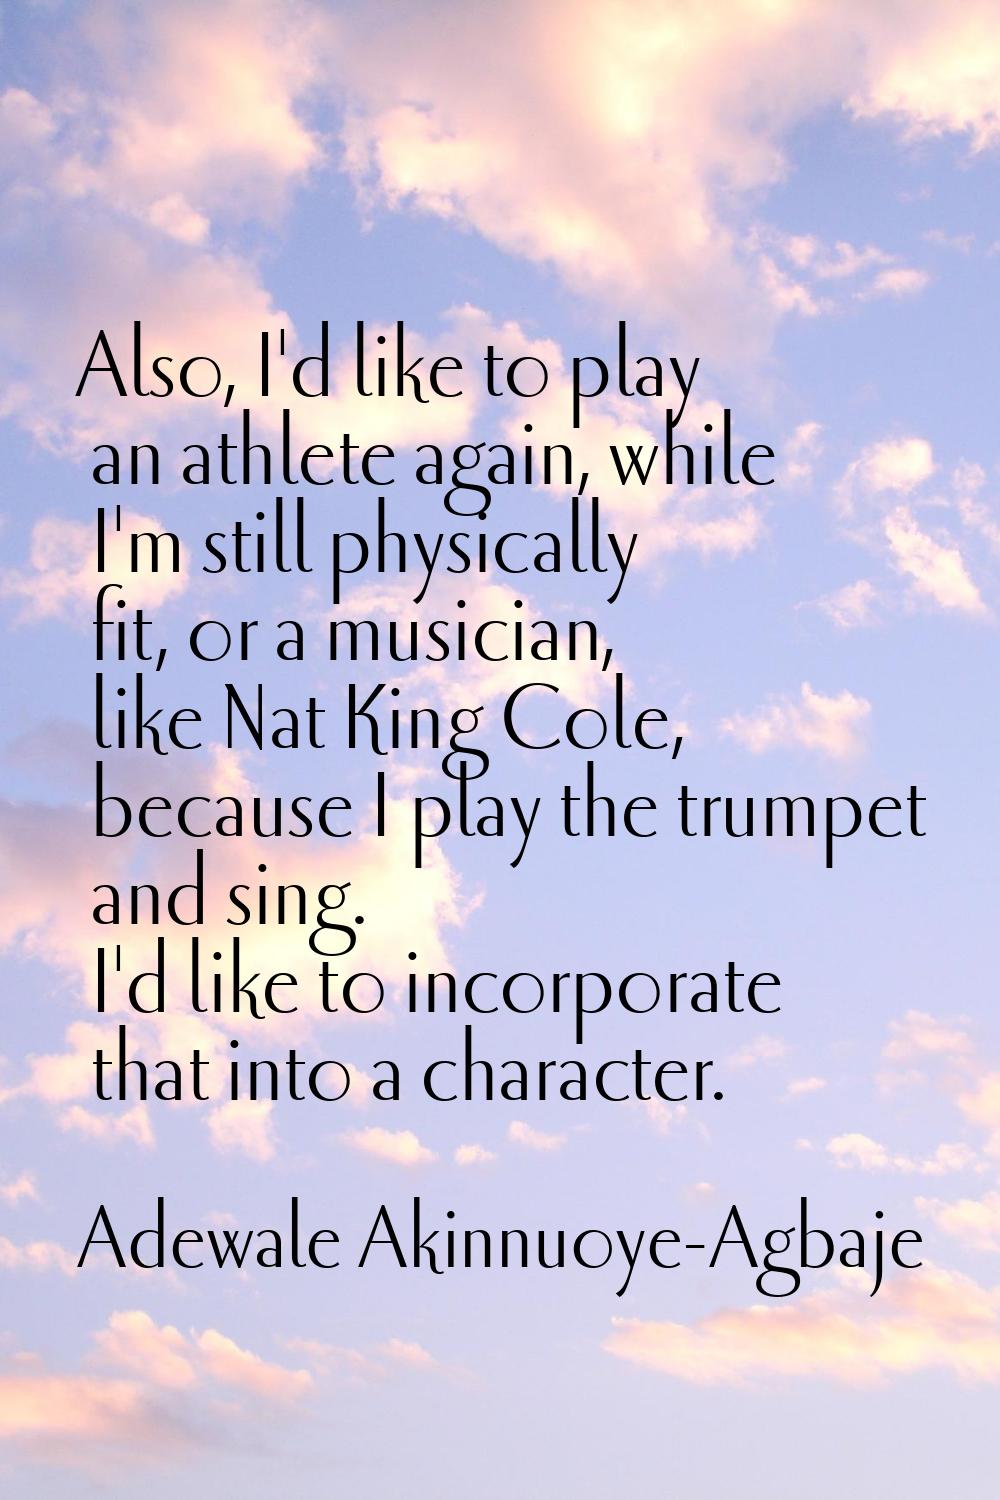 Also, I'd like to play an athlete again, while I'm still physically fit, or a musician, like Nat Ki